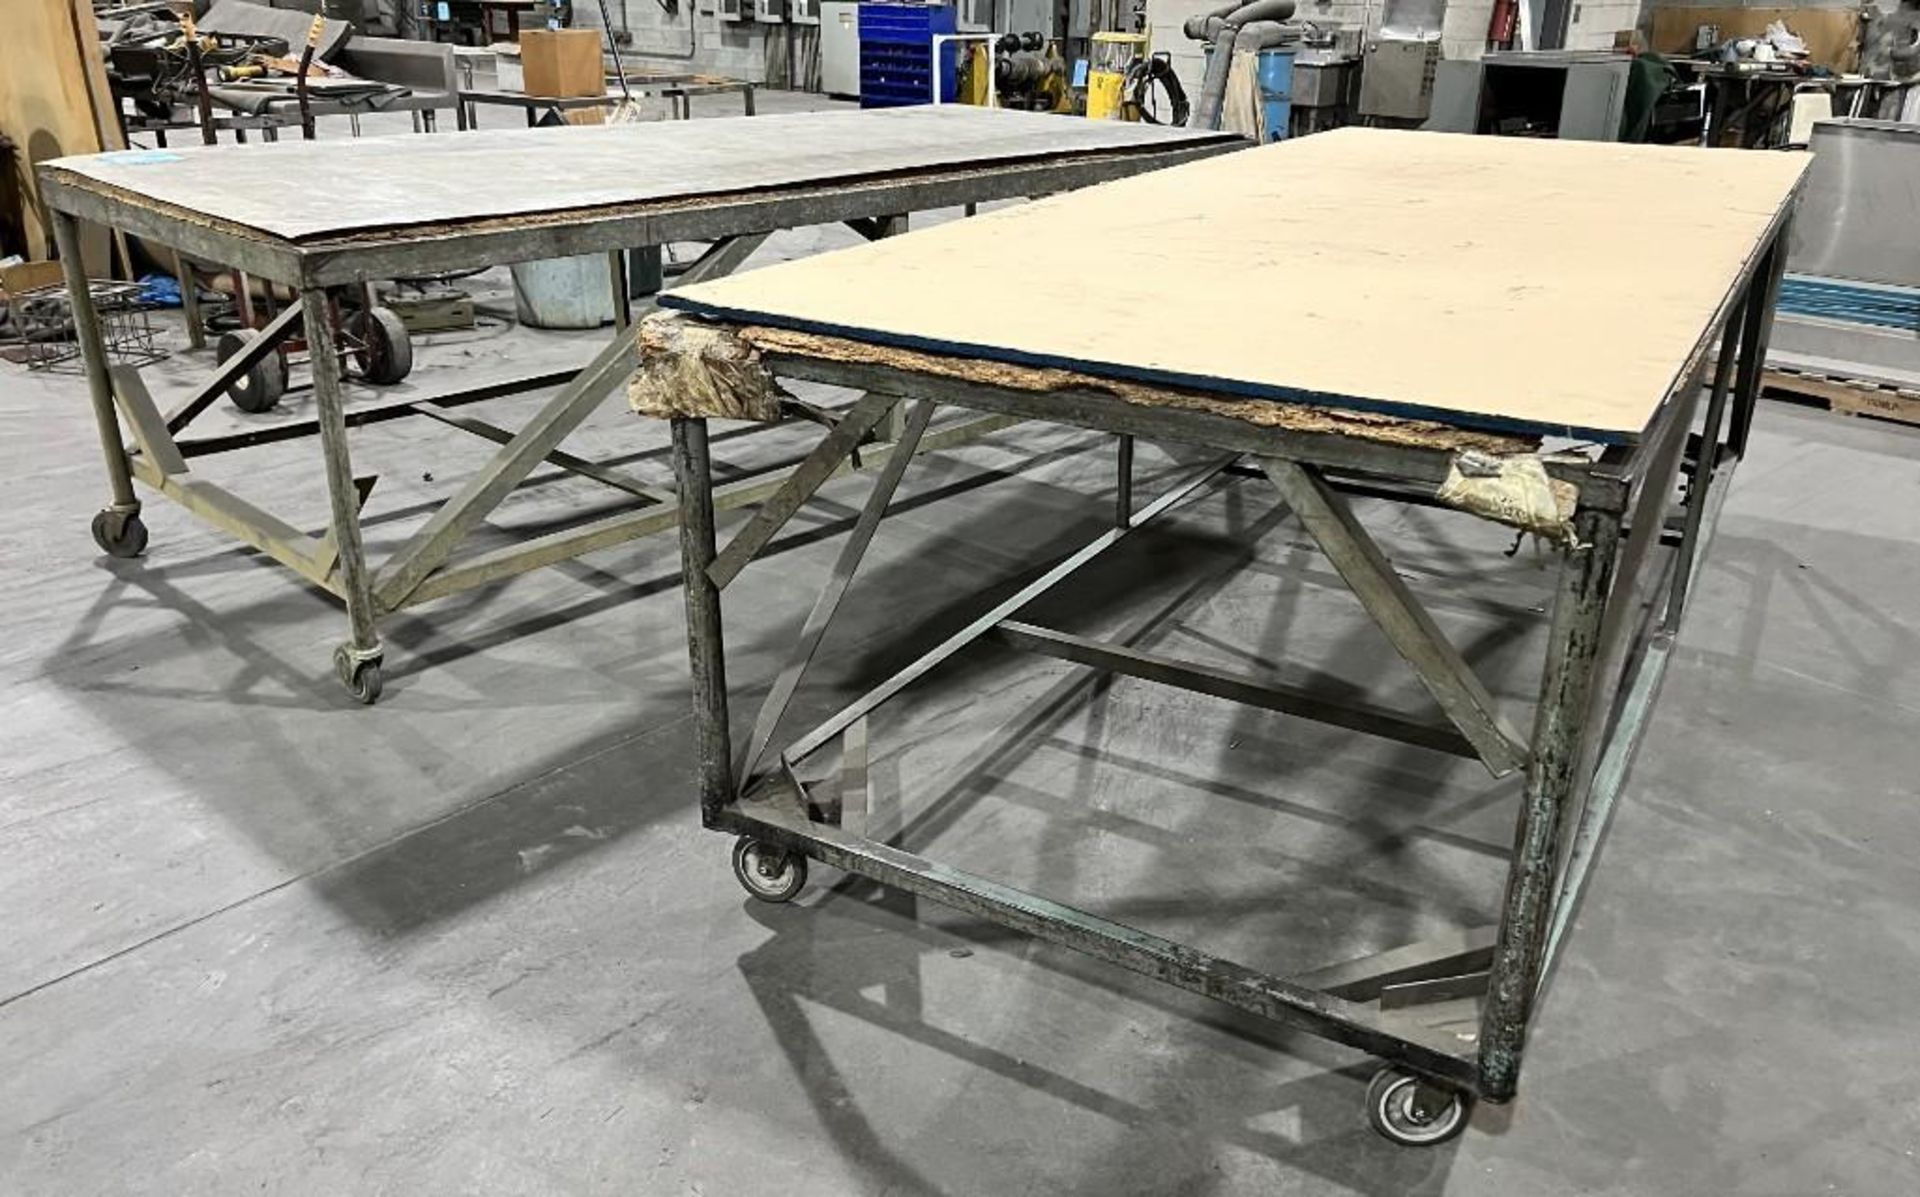 Lot Of (2) Portable Work Tables. Approximate 48" wide x 120" long x 36" tall. - Image 2 of 6